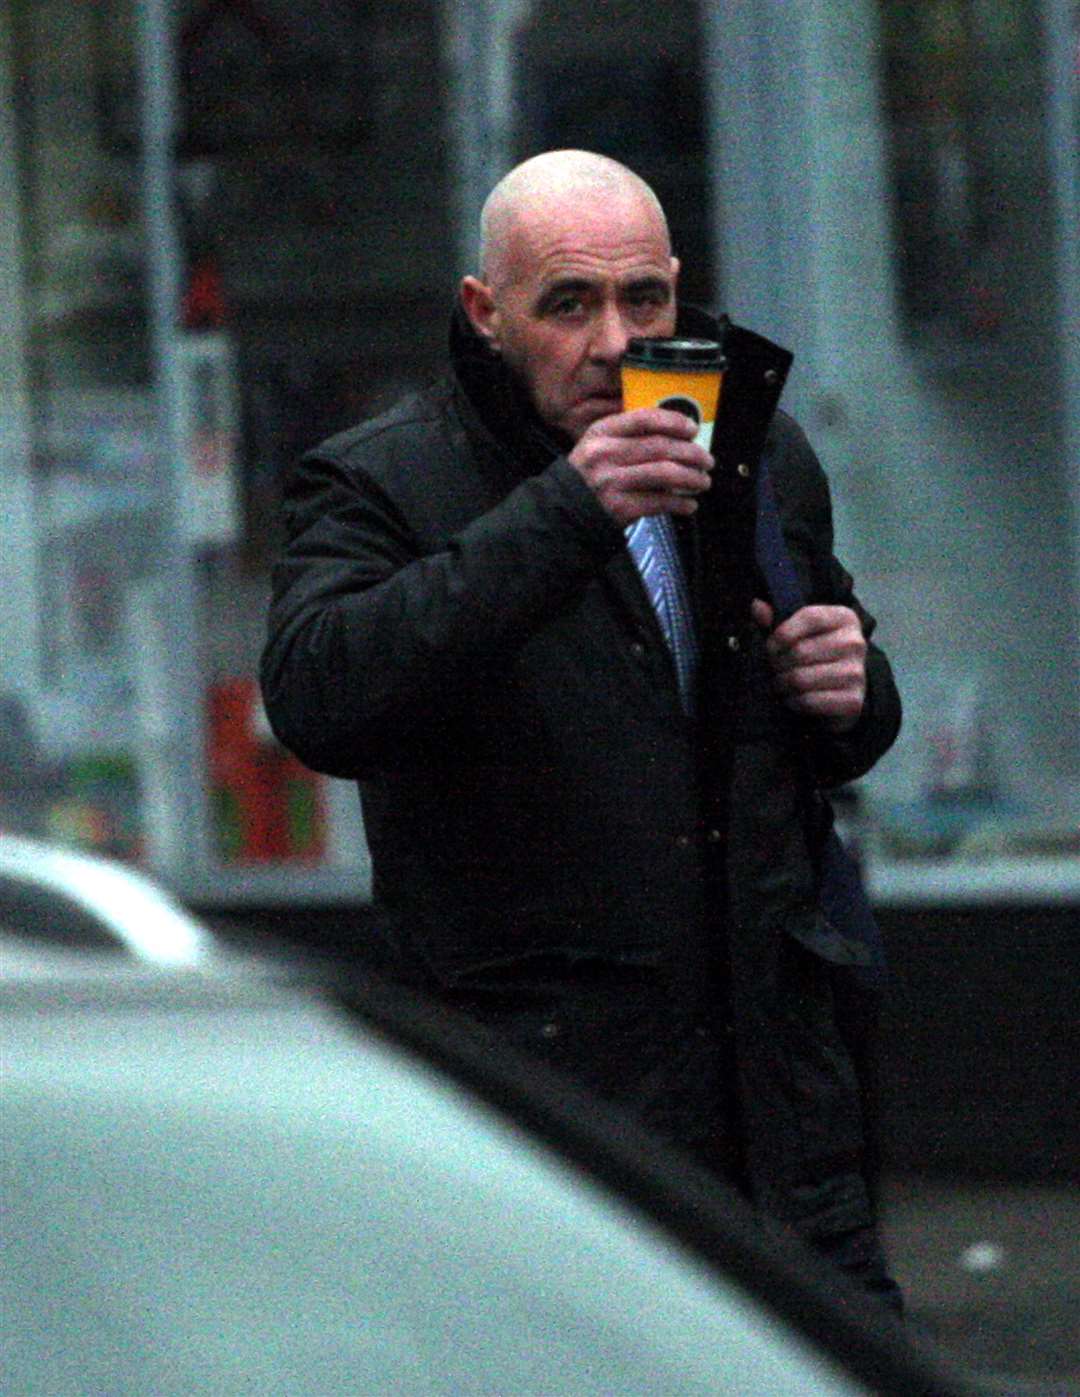 John O'Donnell outside court today. Picture: The Central Scotland News Agency